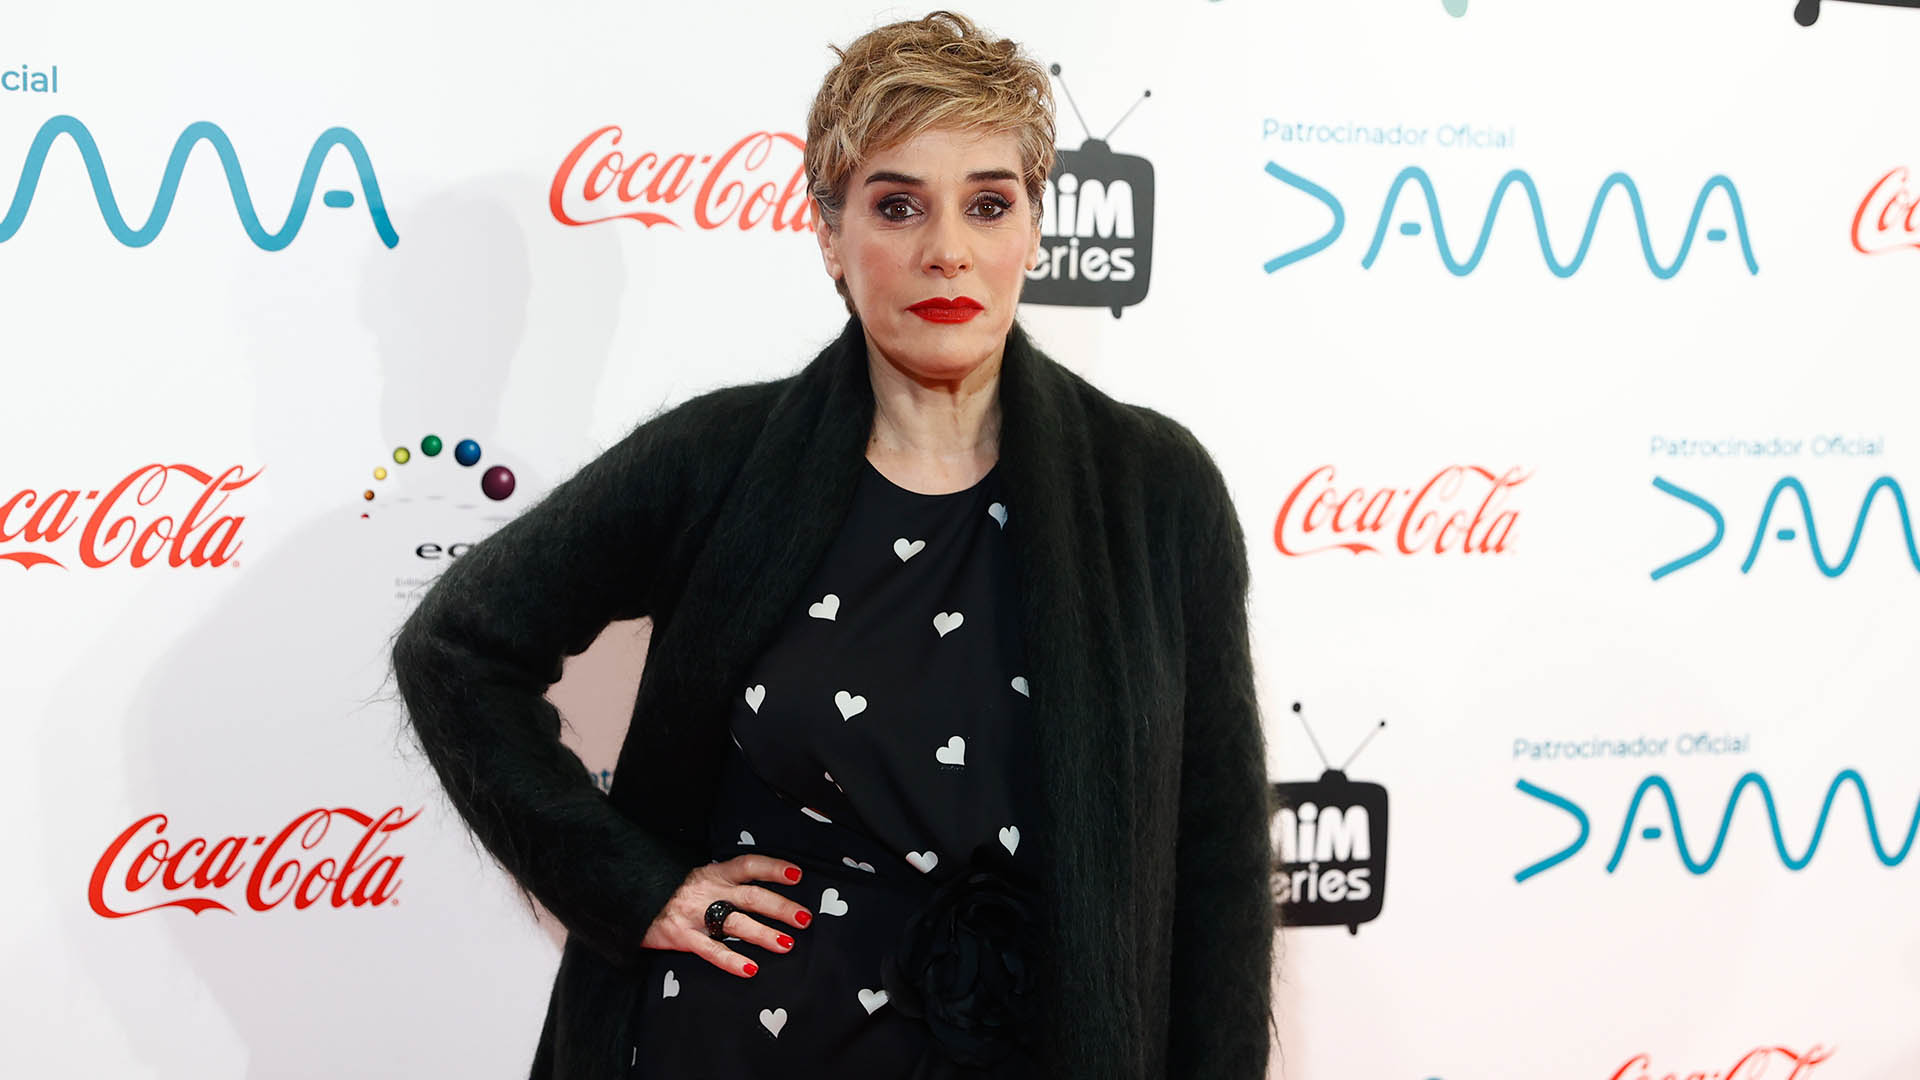 Actress Anabel Alonso attending awards ceremony during MIM Festival in Madrid on Tuesday, February 22, 2022.